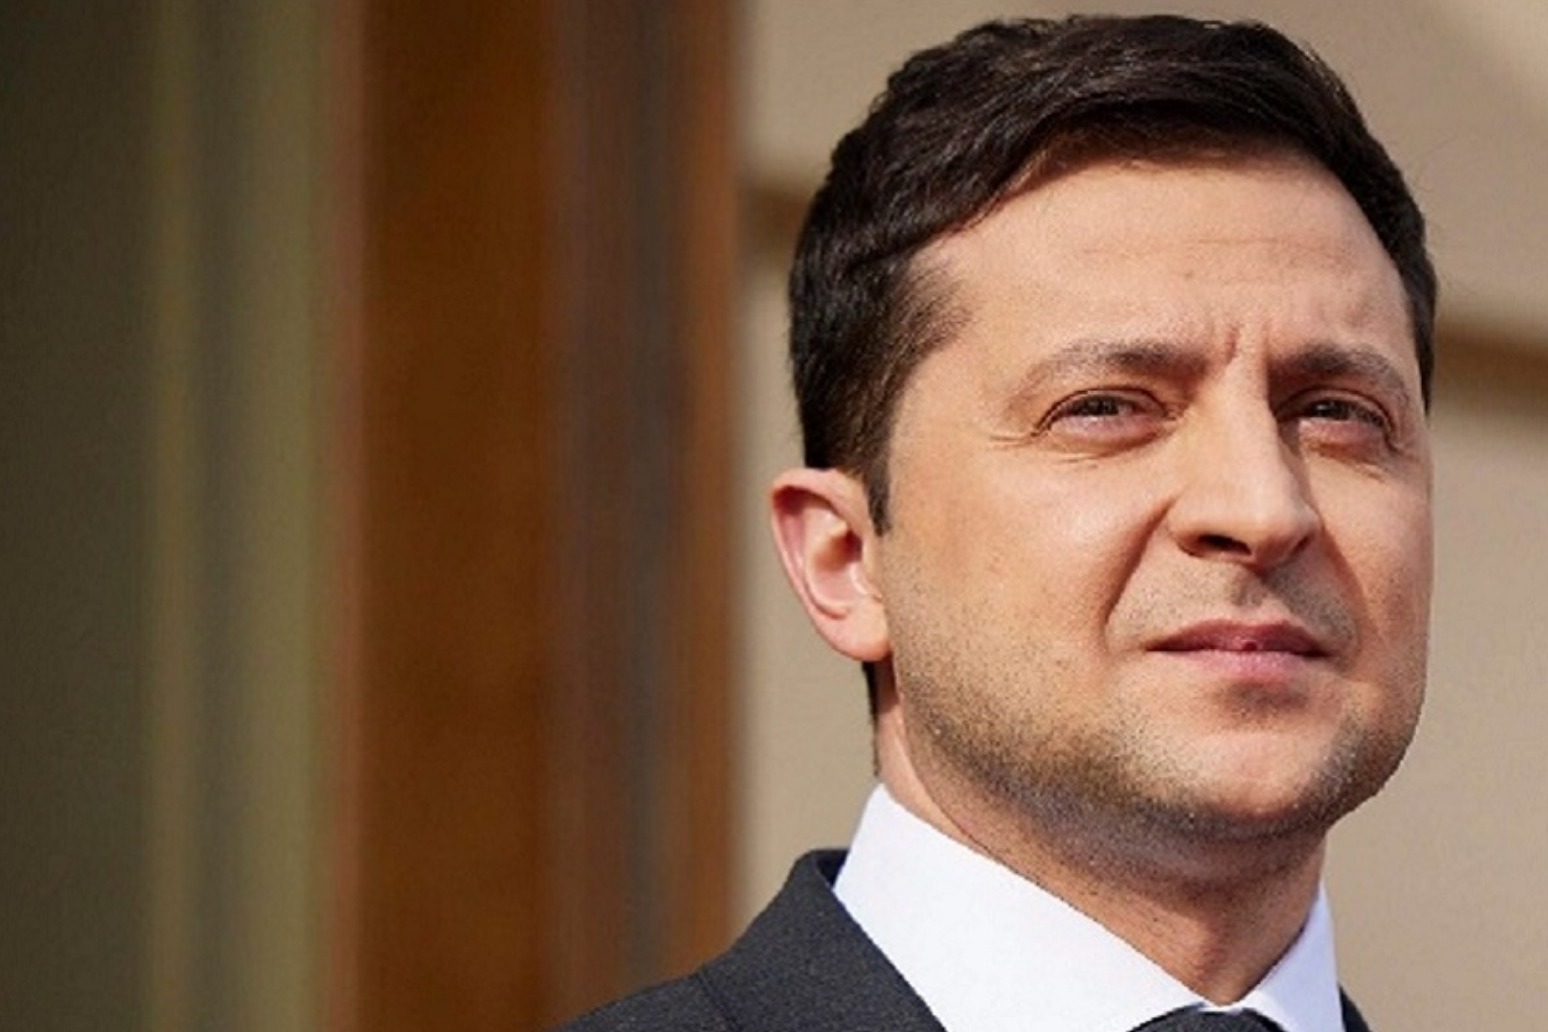 Russia has put Europe one step away from radiation disaster, Zelensky says 